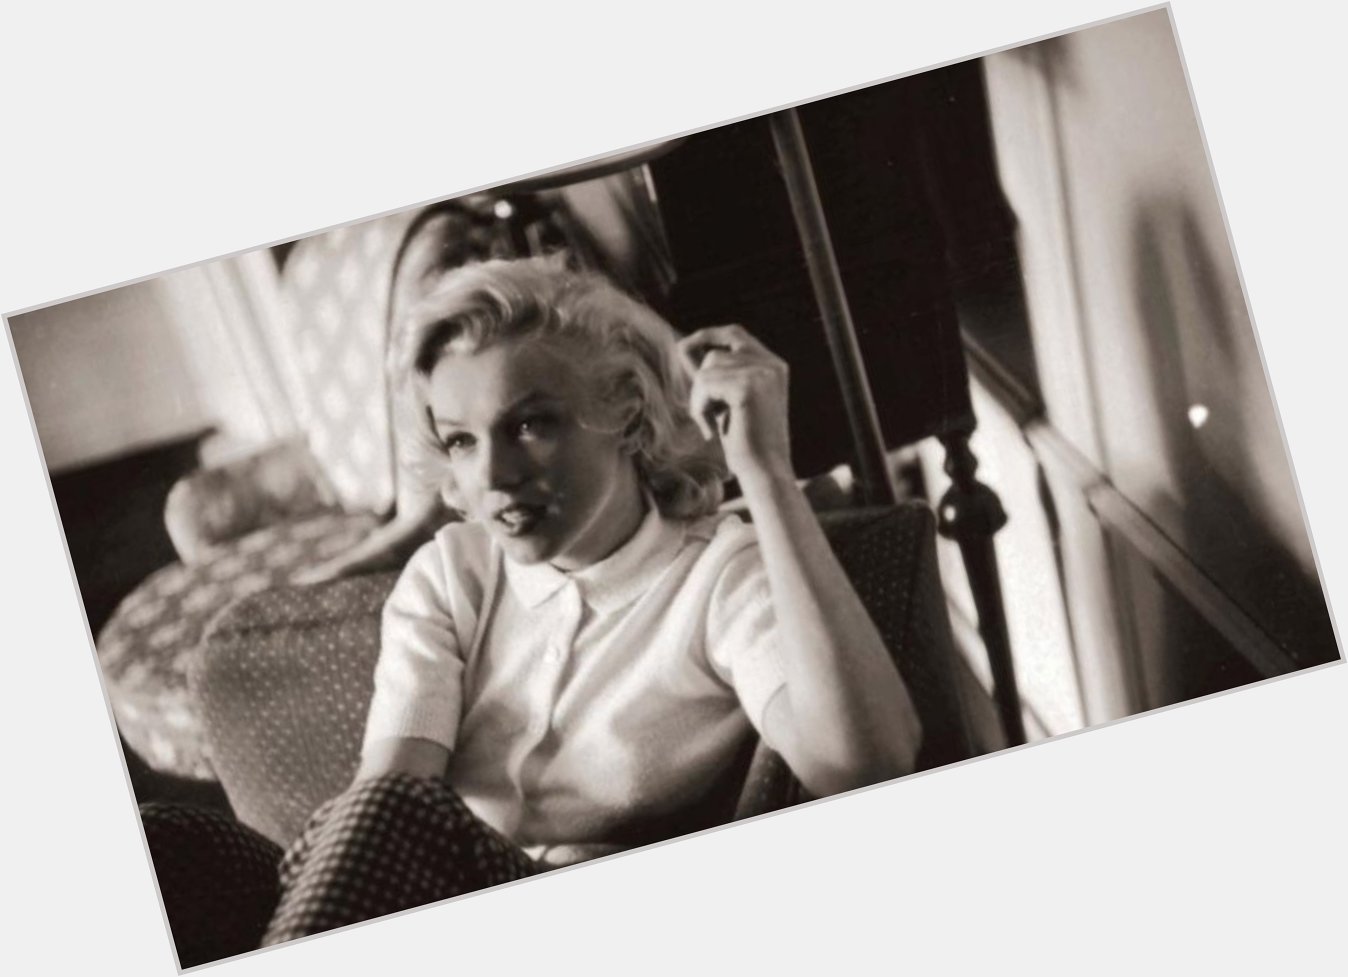 Marilyn Monroe sang to JFK without wearing \any underwear,\ book claims:
 